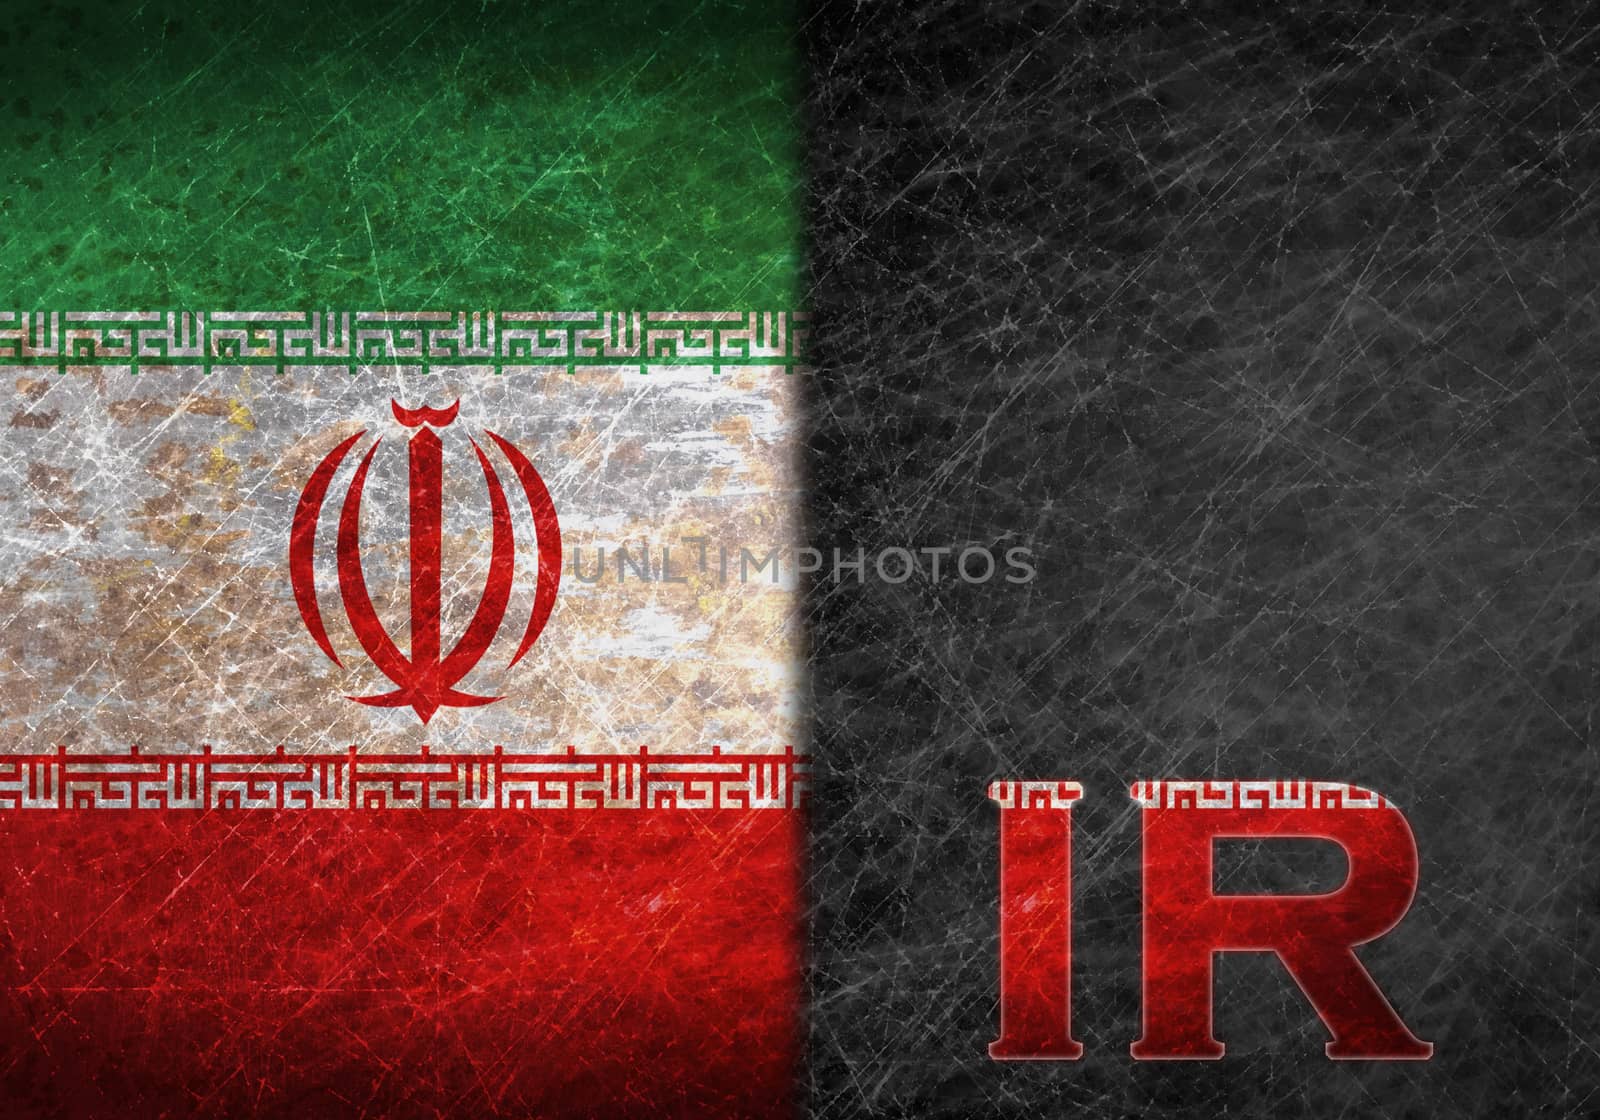 Old rusty metal sign with a flag and country abbreviation - Iran